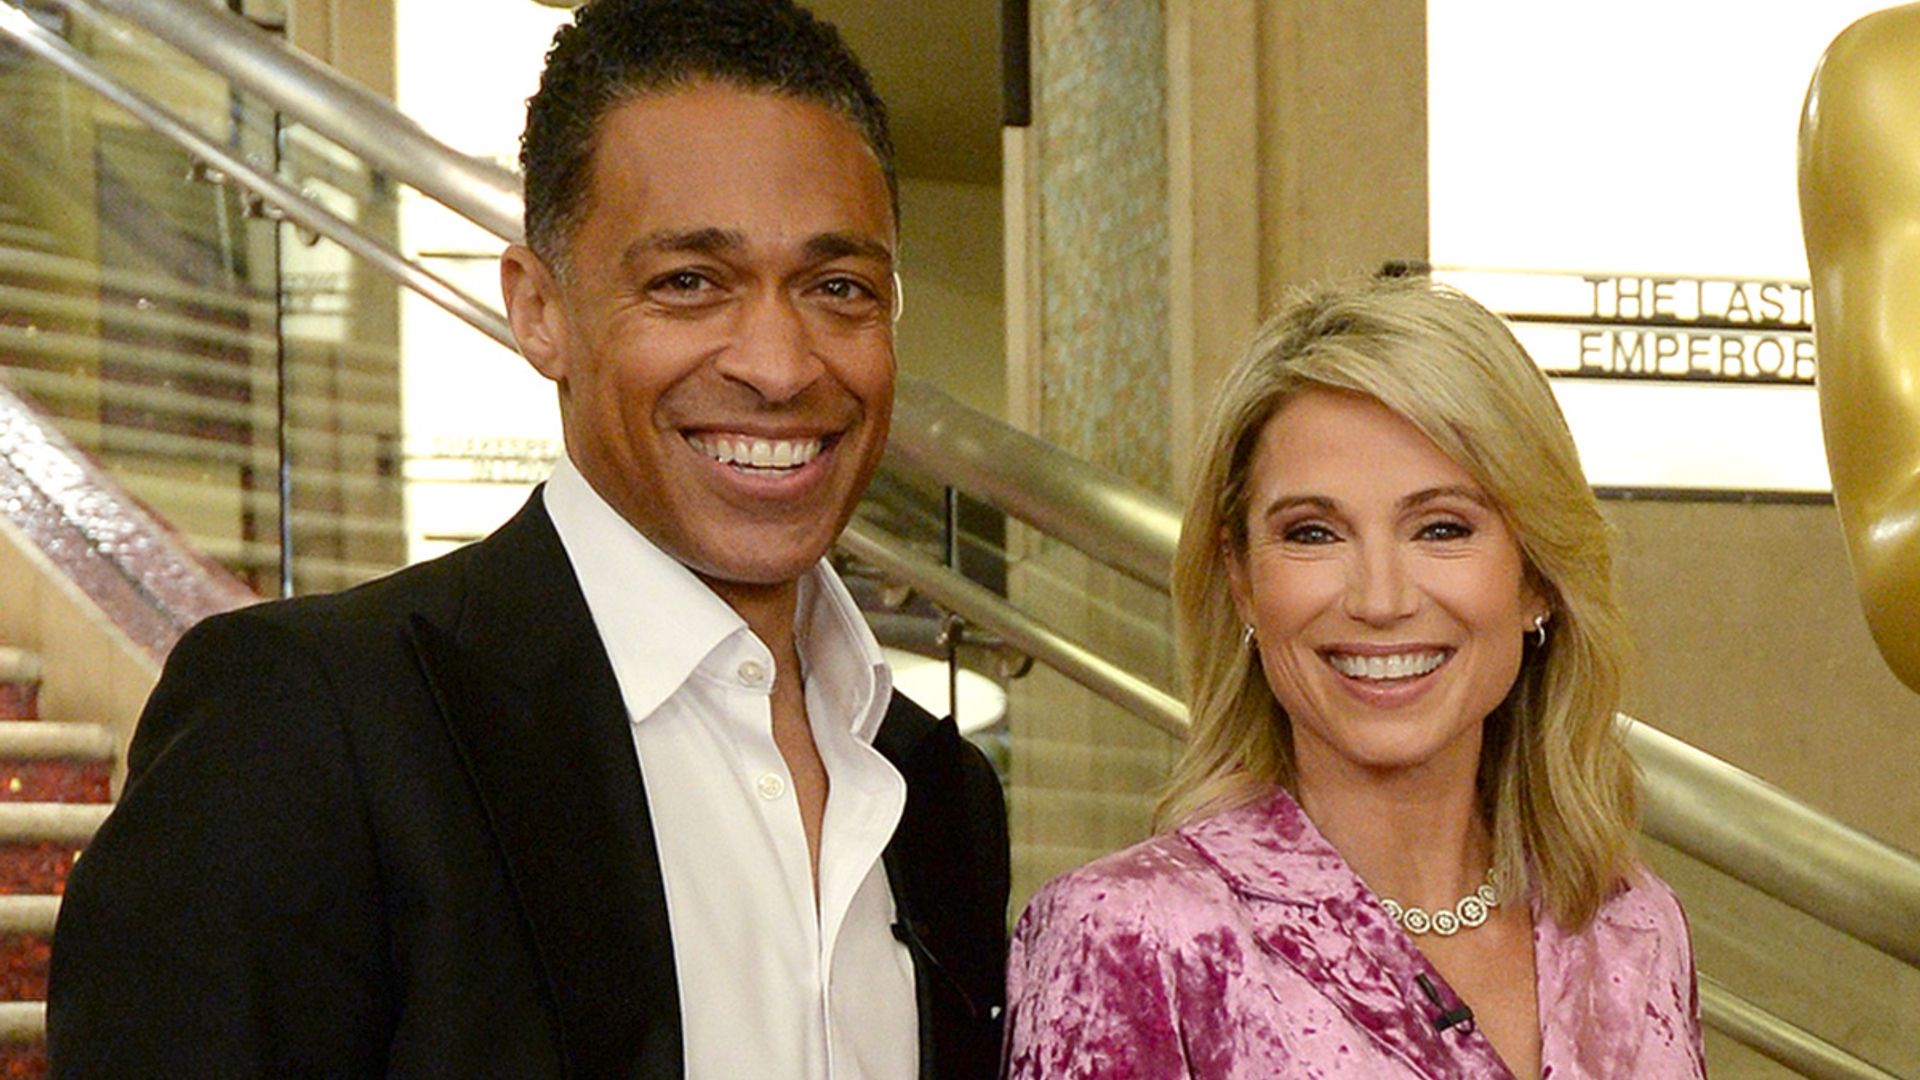 Amy Robach and T.J. Holmes following in the footsteps of very famous couple - see why